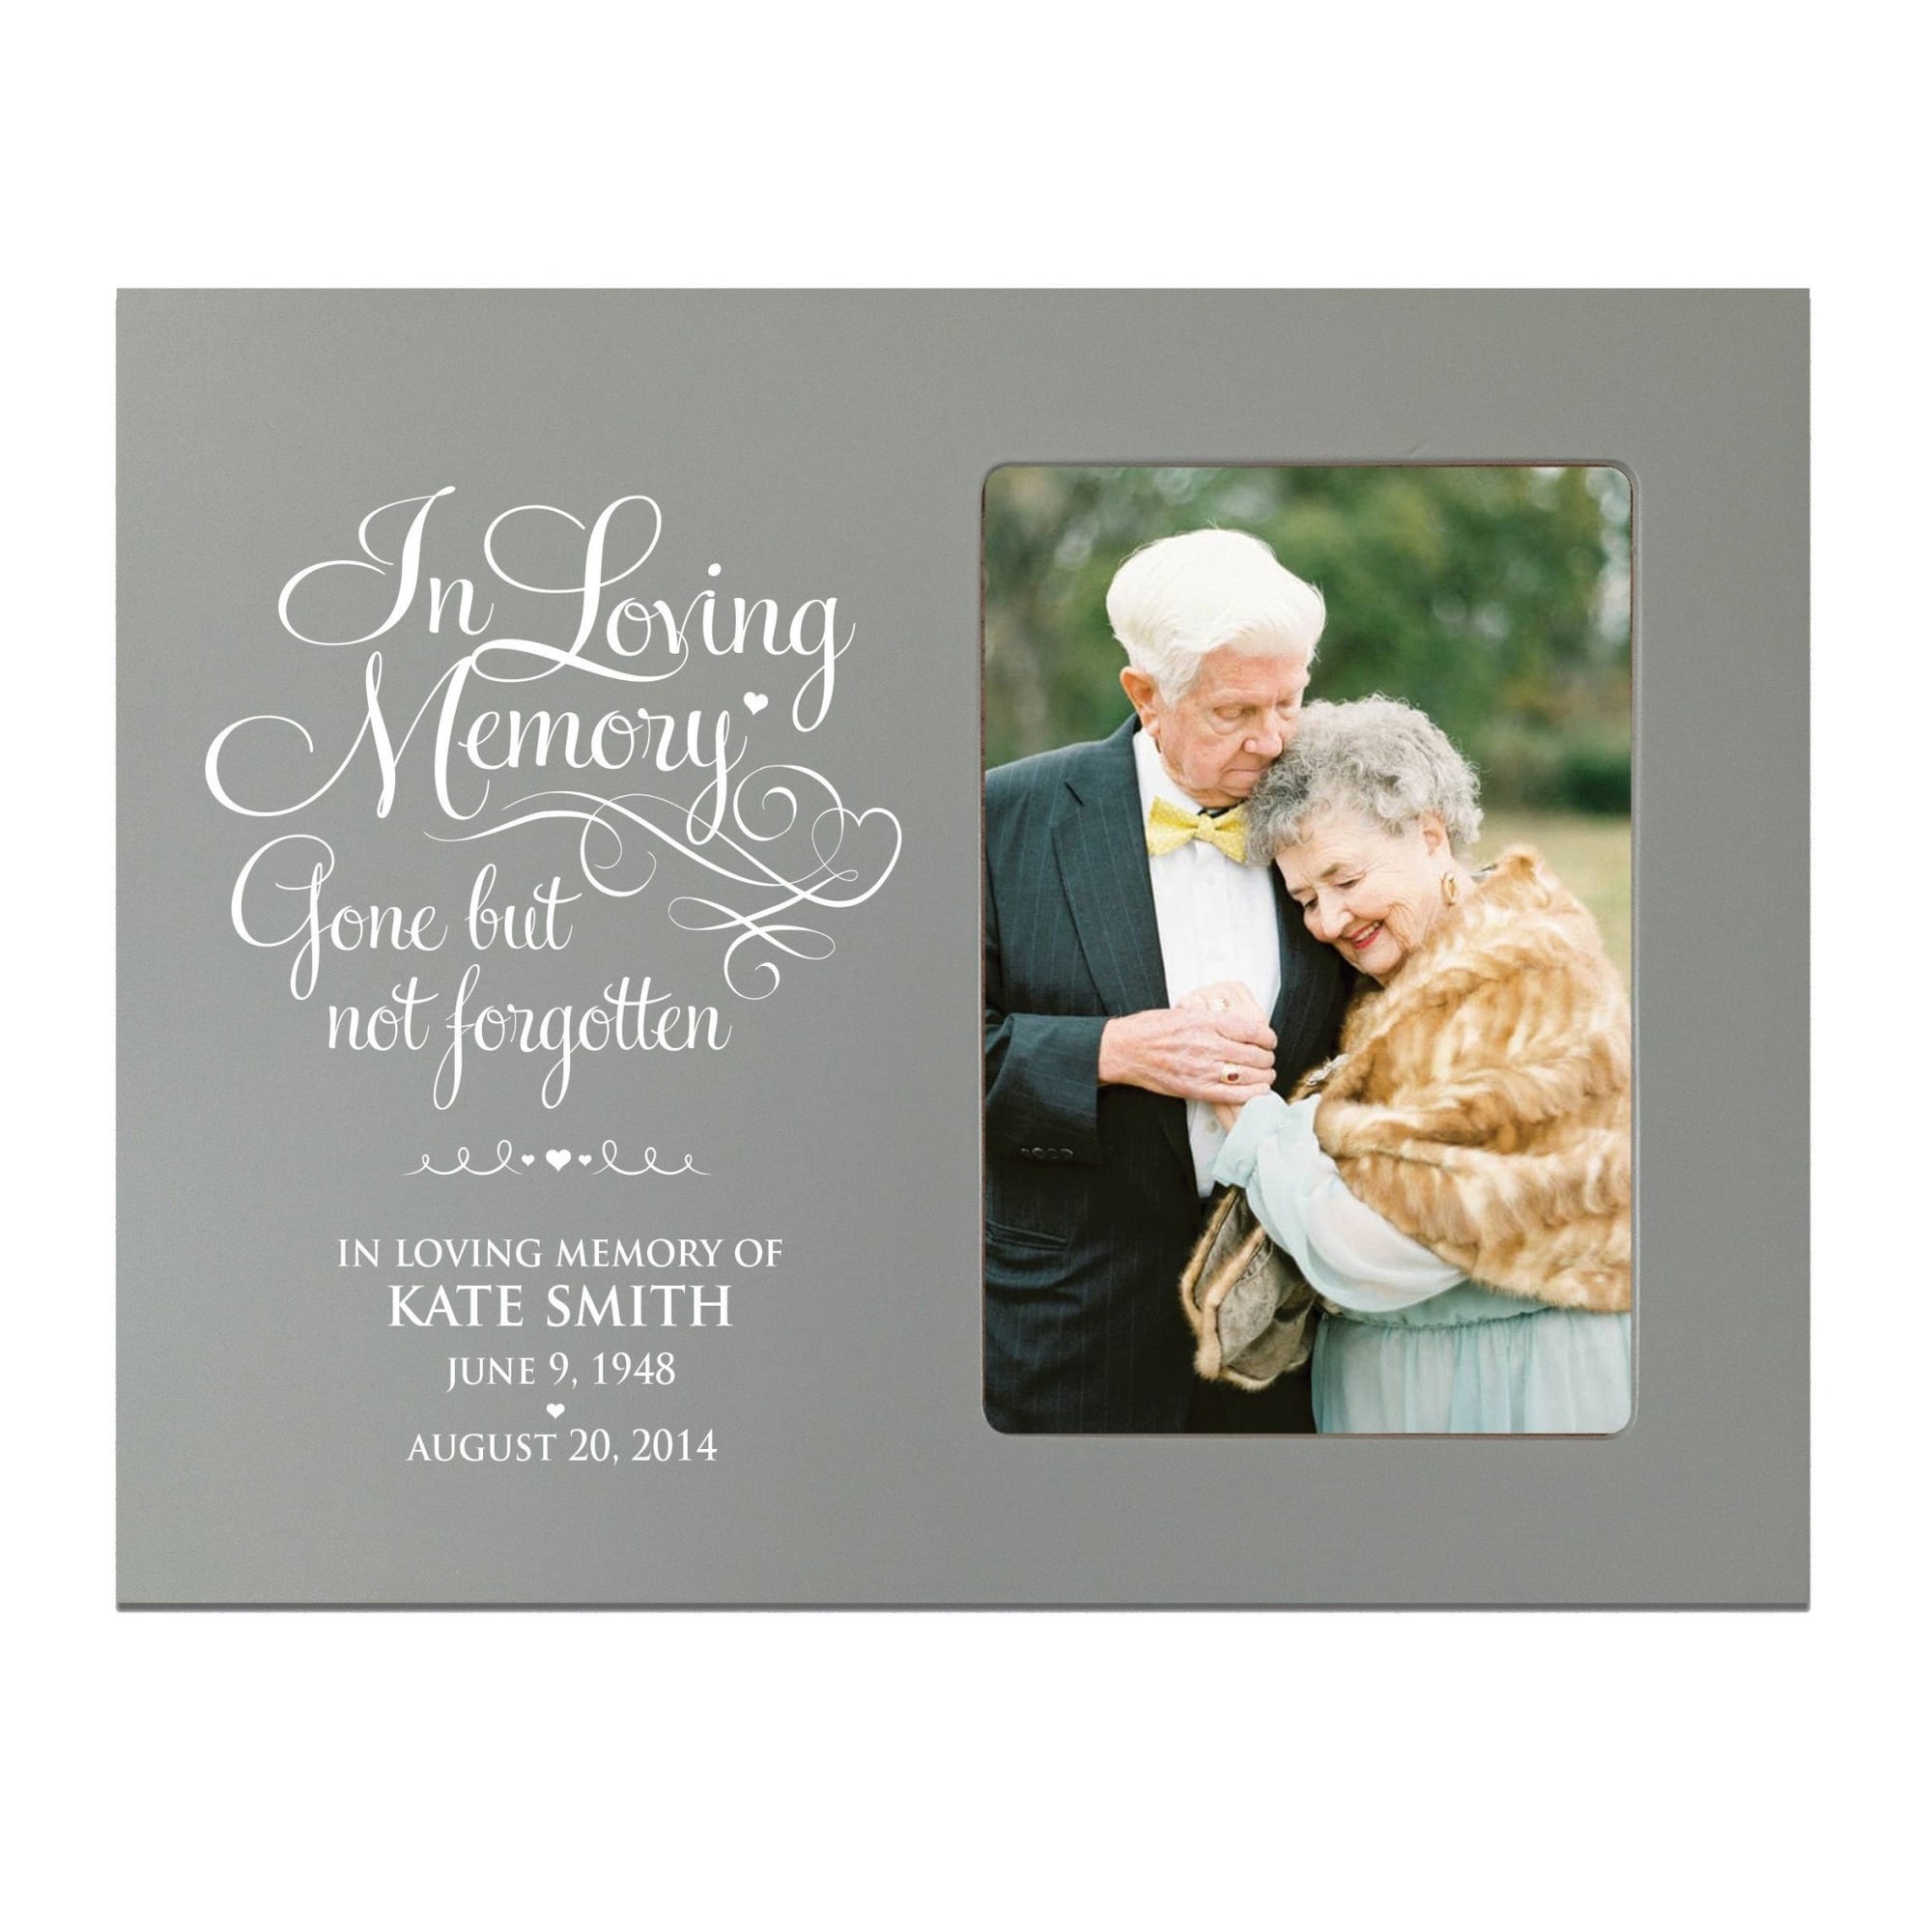 Personalized Wooden Memorial 8x10 Picture Frame holds 4x6 phot Gone But Not Forgotten - LifeSong Milestones